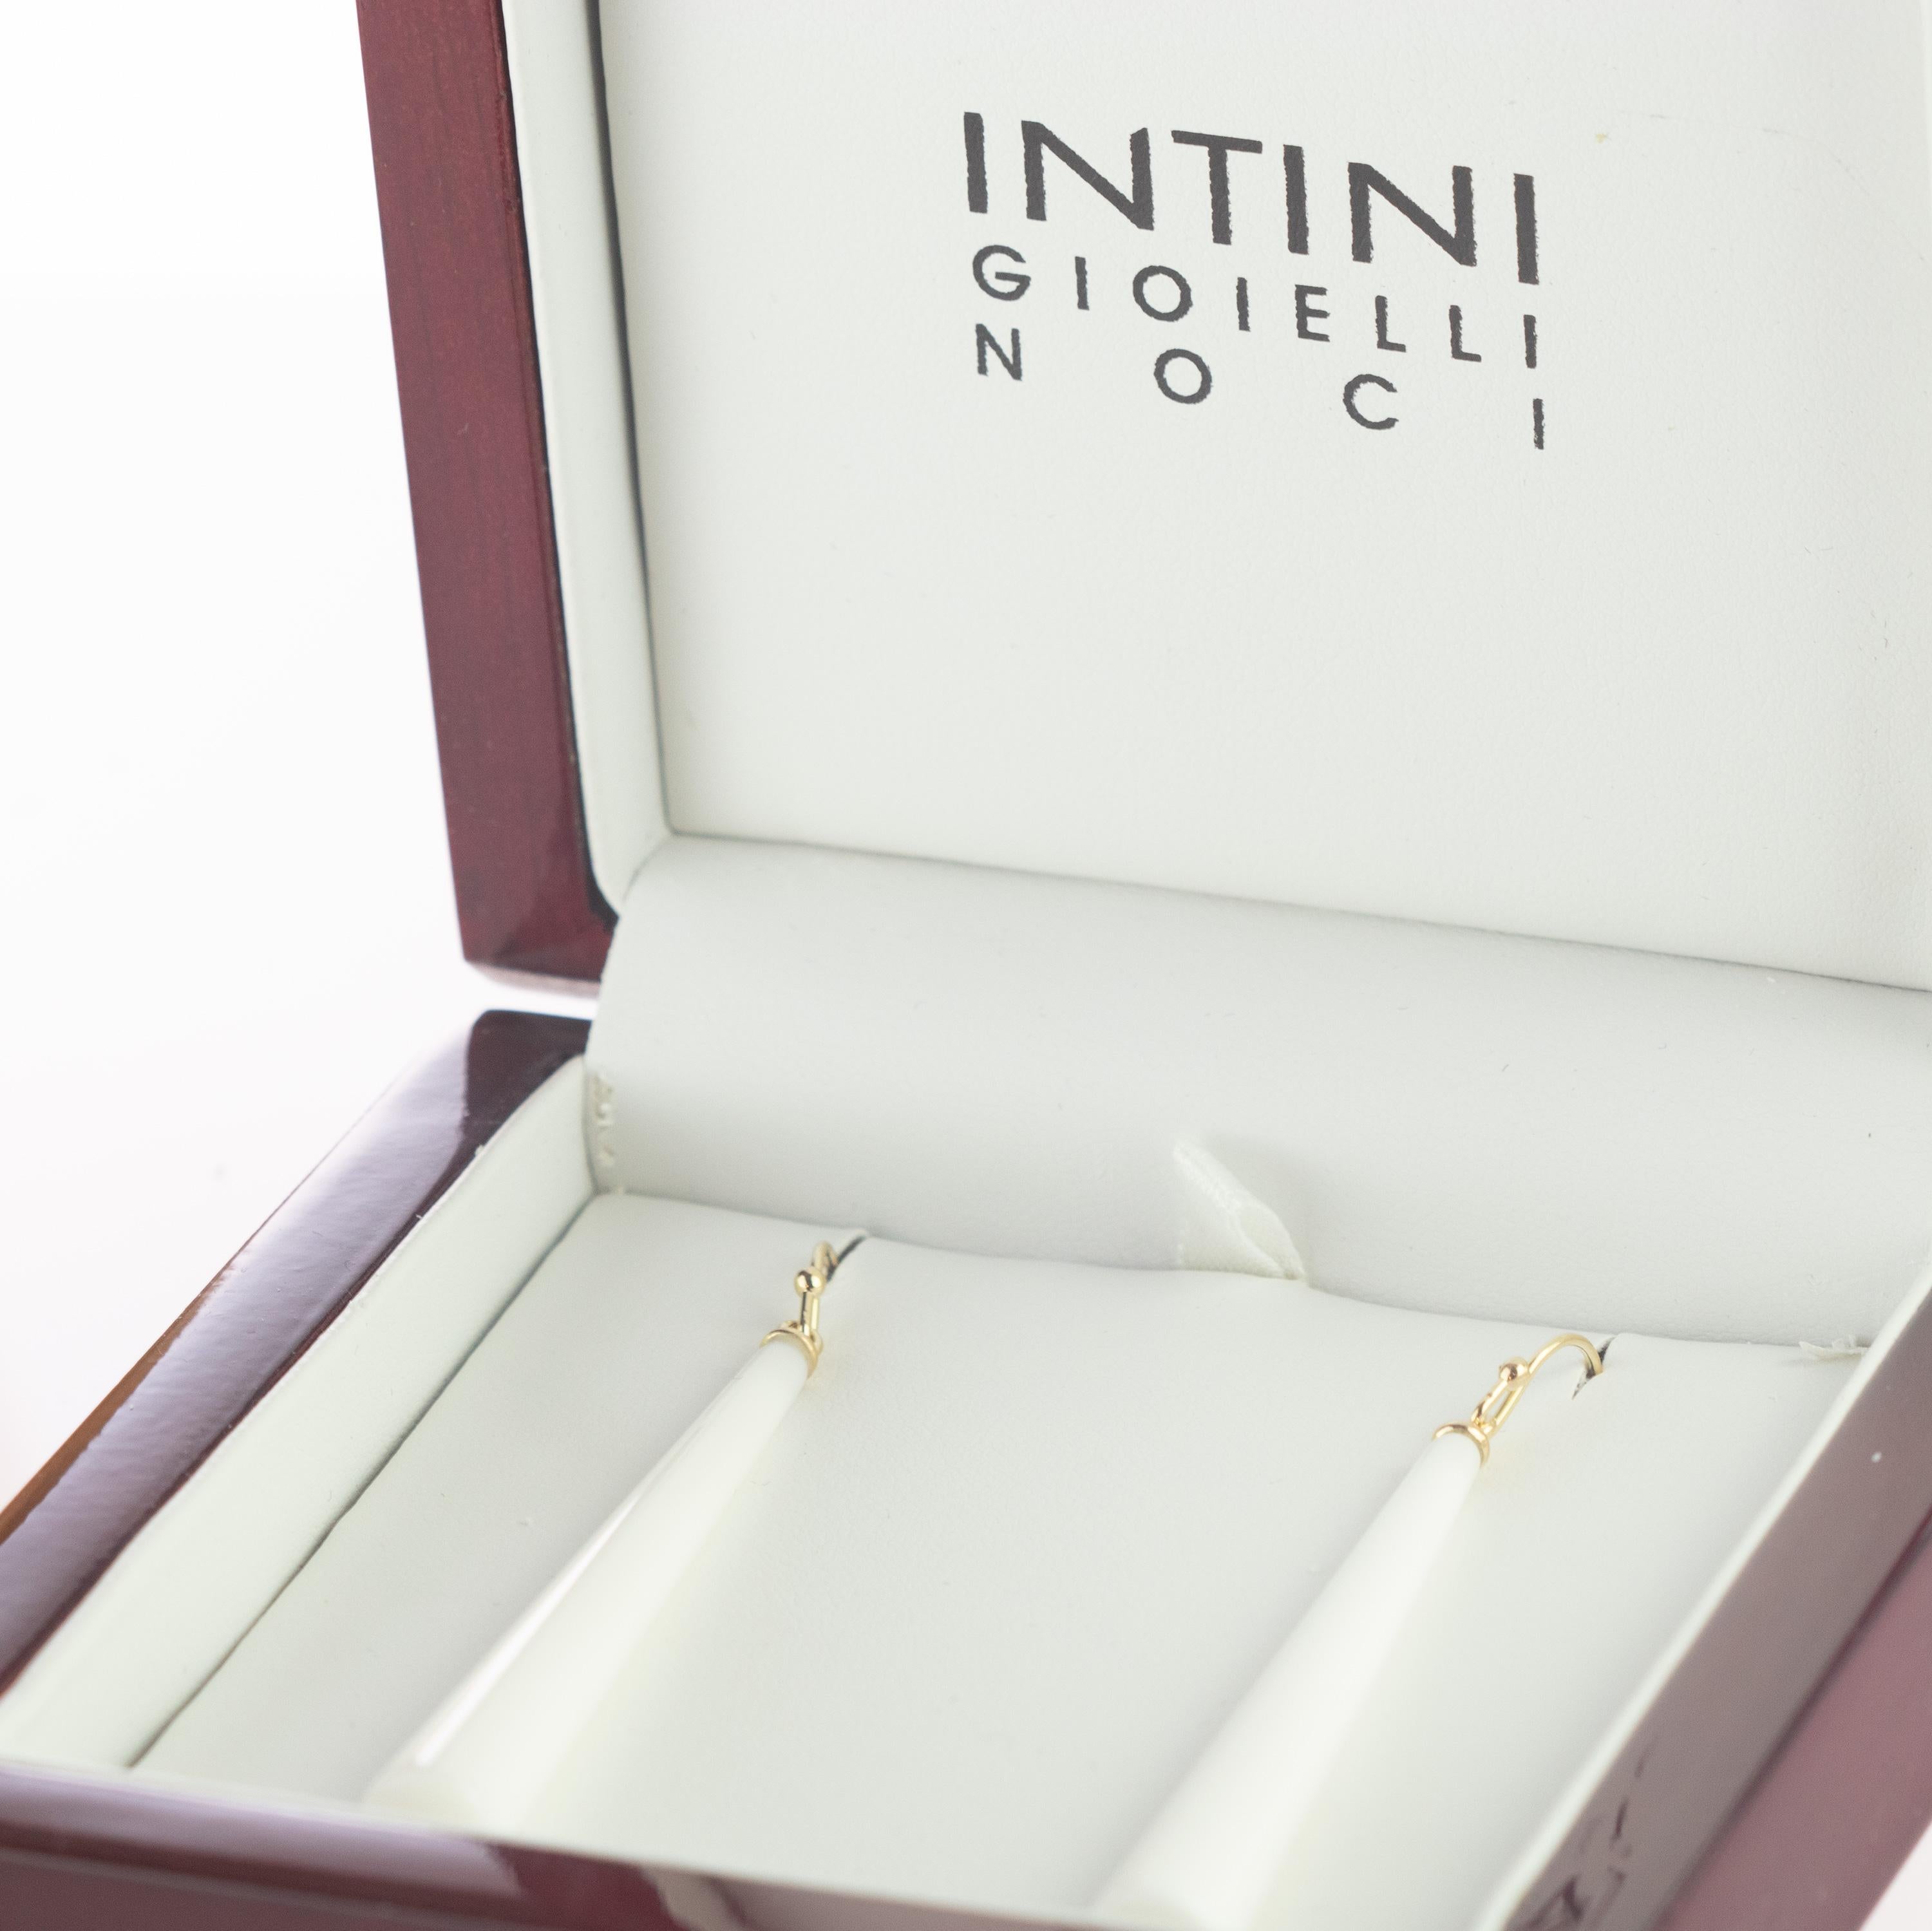 This stunning masterpiece with high quality craftsmanship was born in the Intini Jewels workshop. Our designers add all the italian modern style and glamour in one exquisite piece. Stunning 41.5 carat white Agate sharp and flat teardrop, hanging